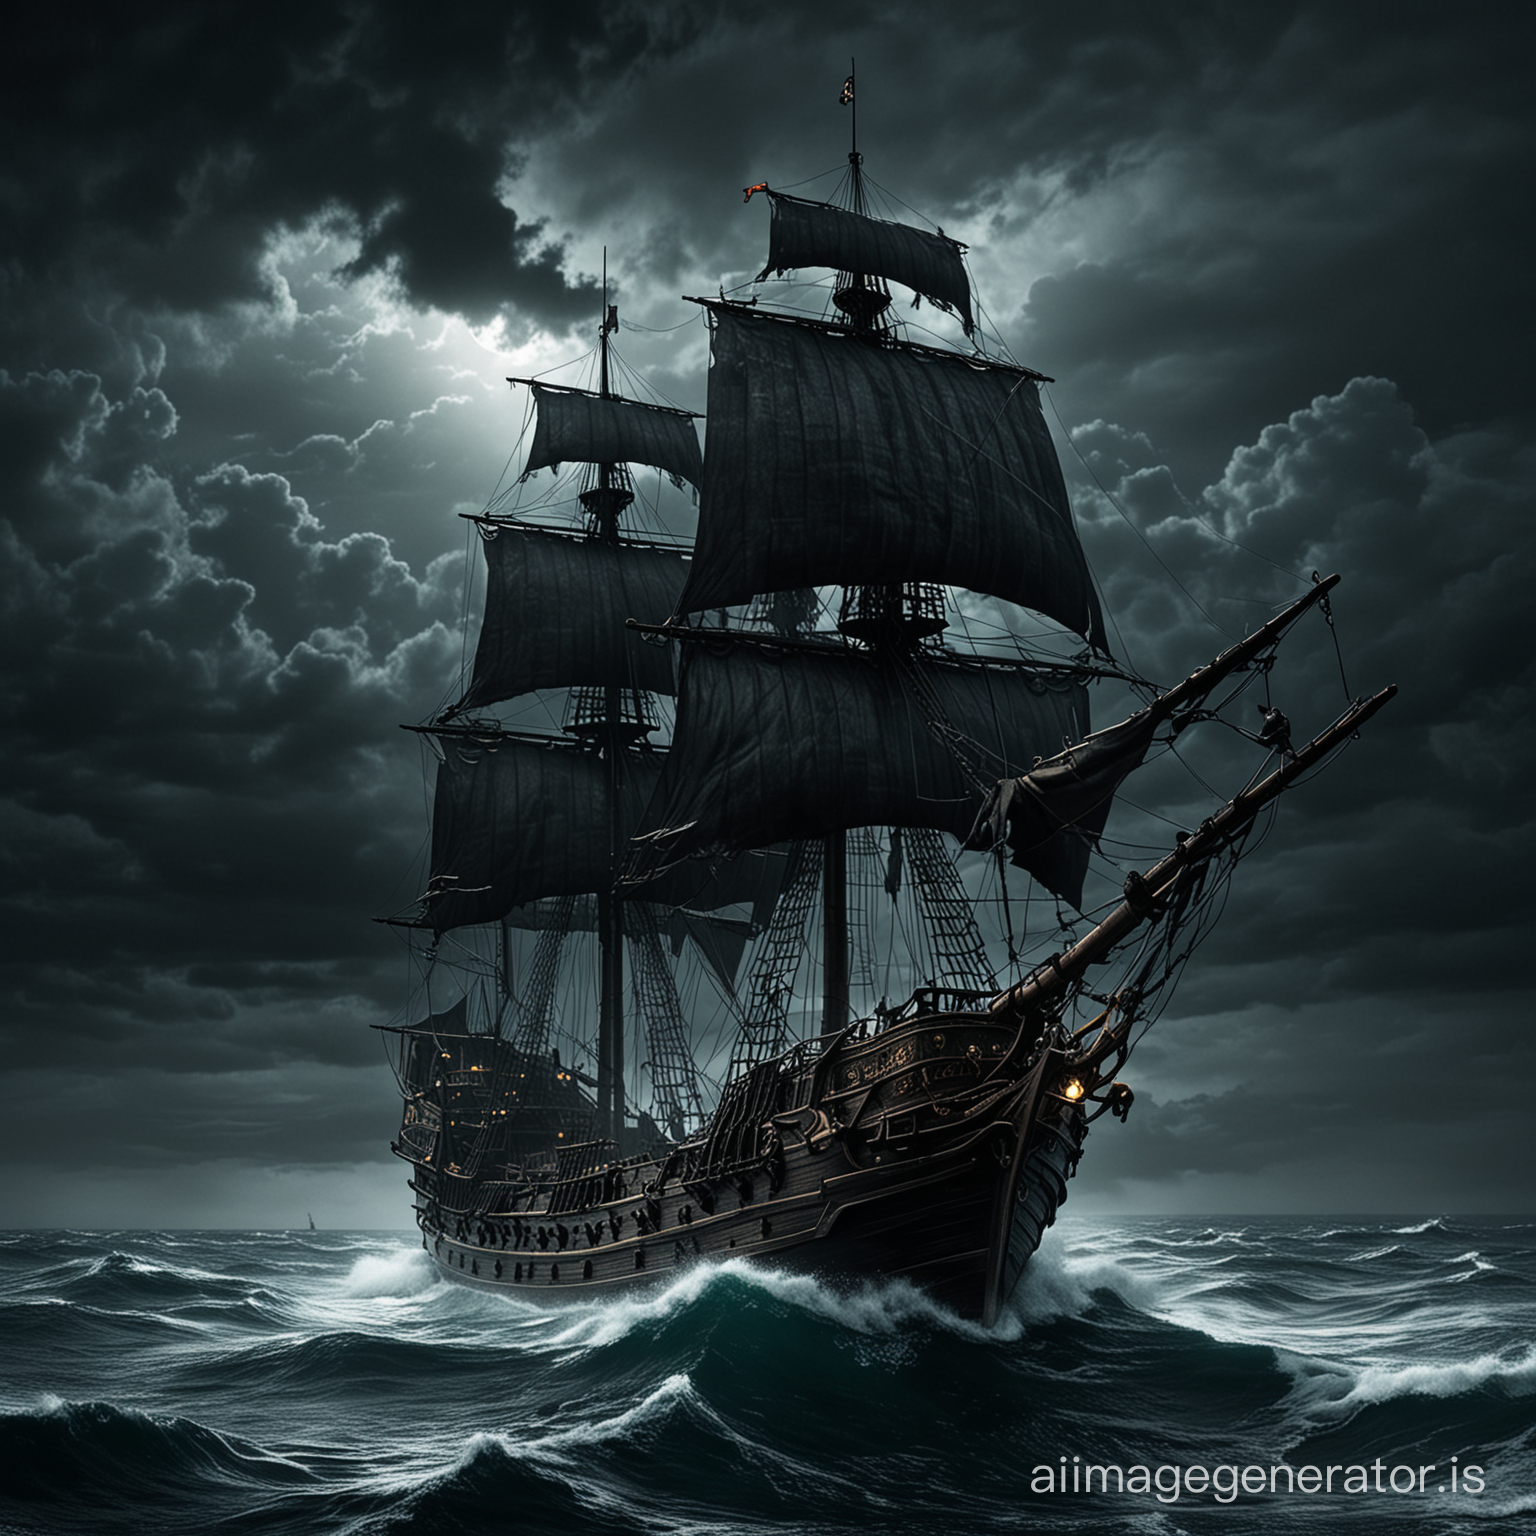 A dark pirate ship sailing on a stormy dark sea, in the dead of night